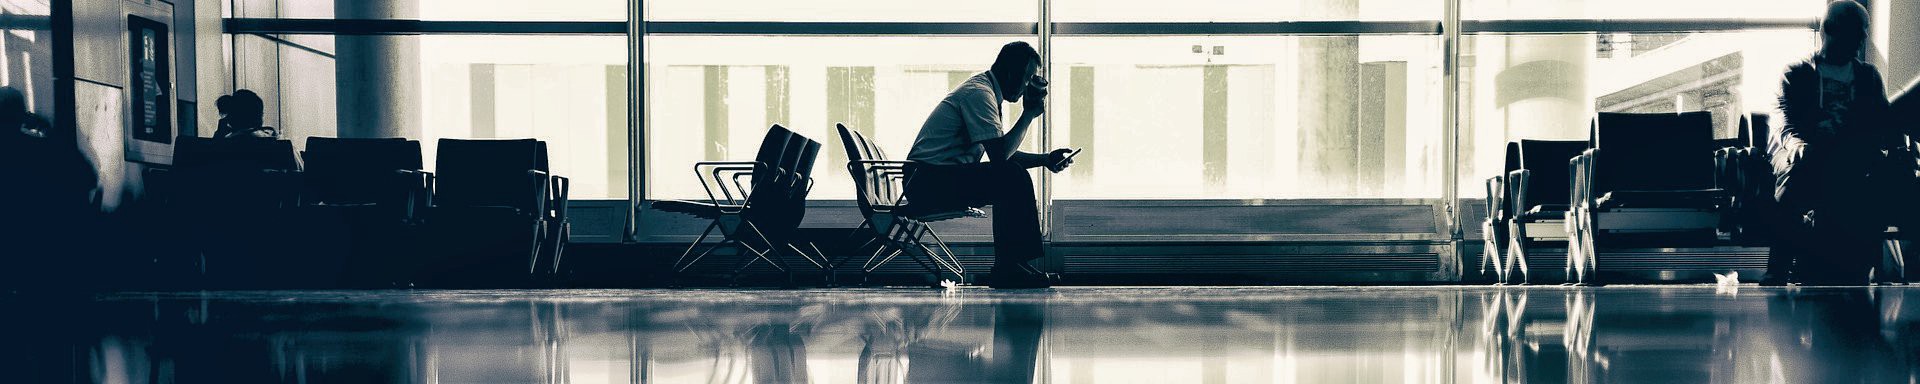 A man sits drinking coffee in an airport.